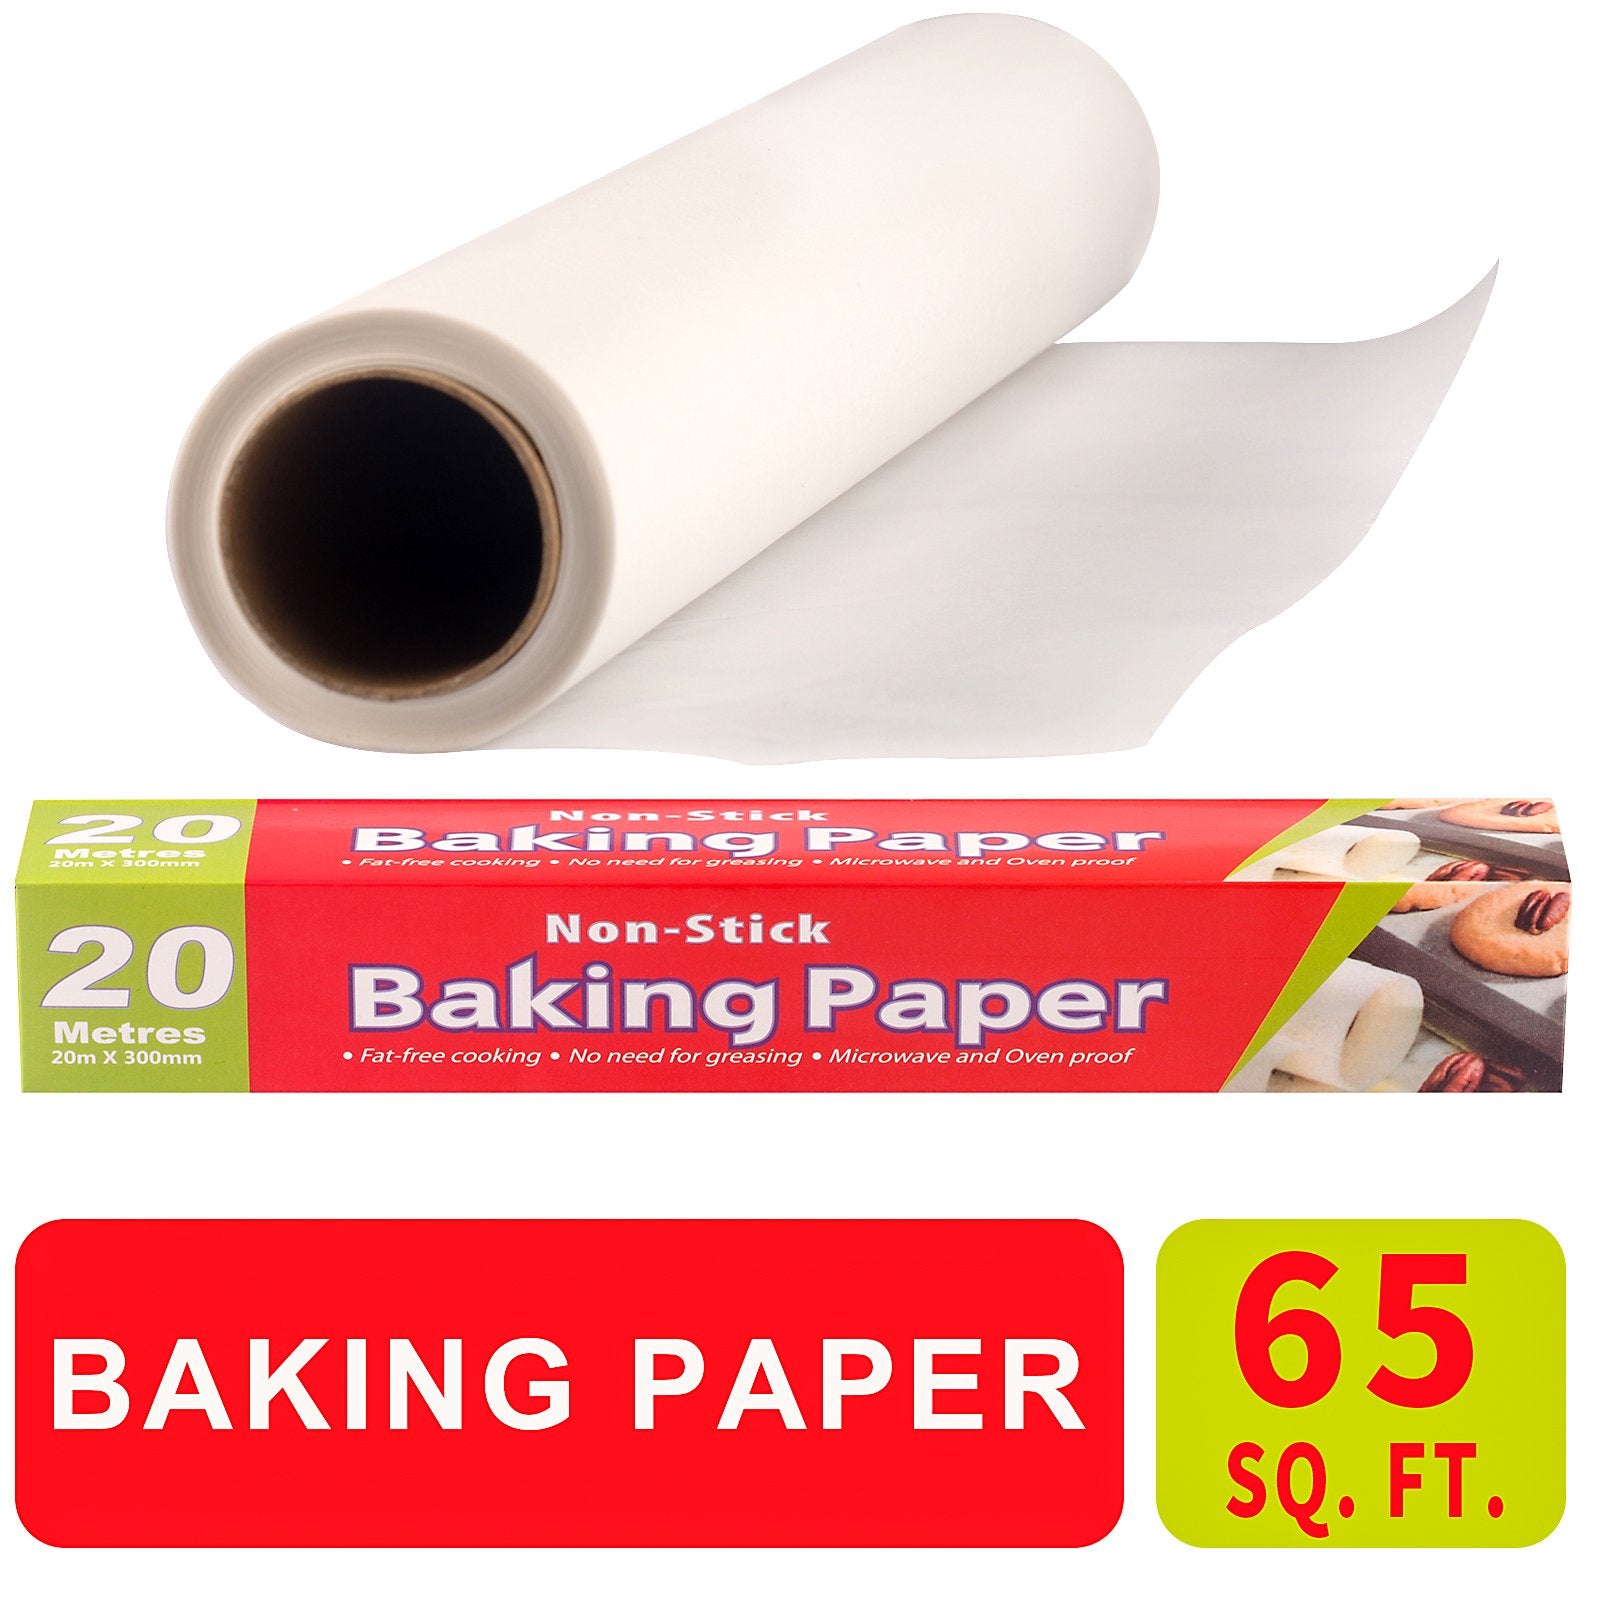 NutriChef 200 Sq. Ft. Heavy Duty Parchment Paper Roll for Baking